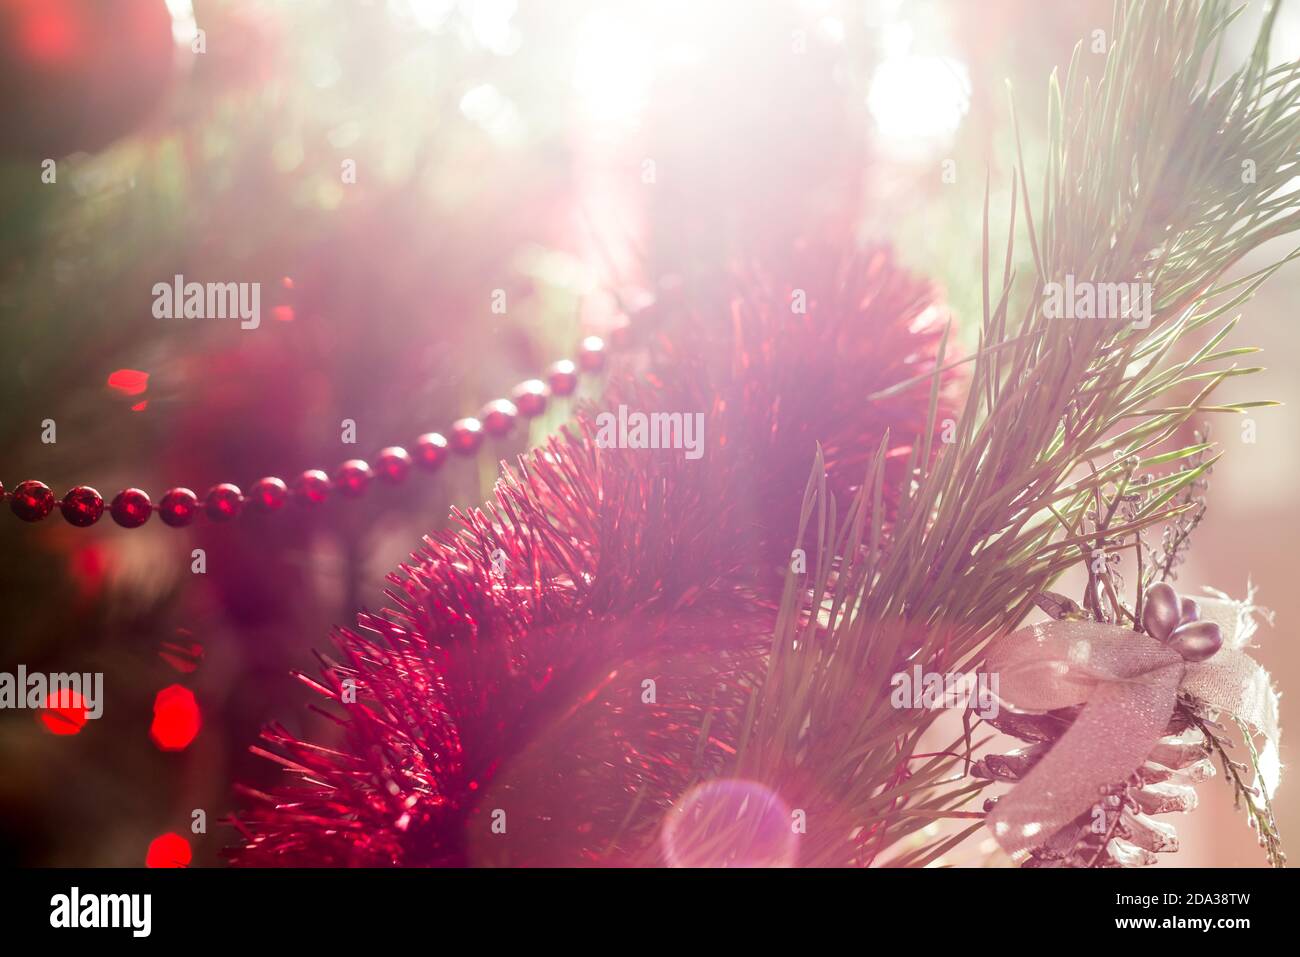 Christmas or New Year red decorative ball on a festively decorated tree. Christmas background. Selective soft focus. Bokeh Stock Photo